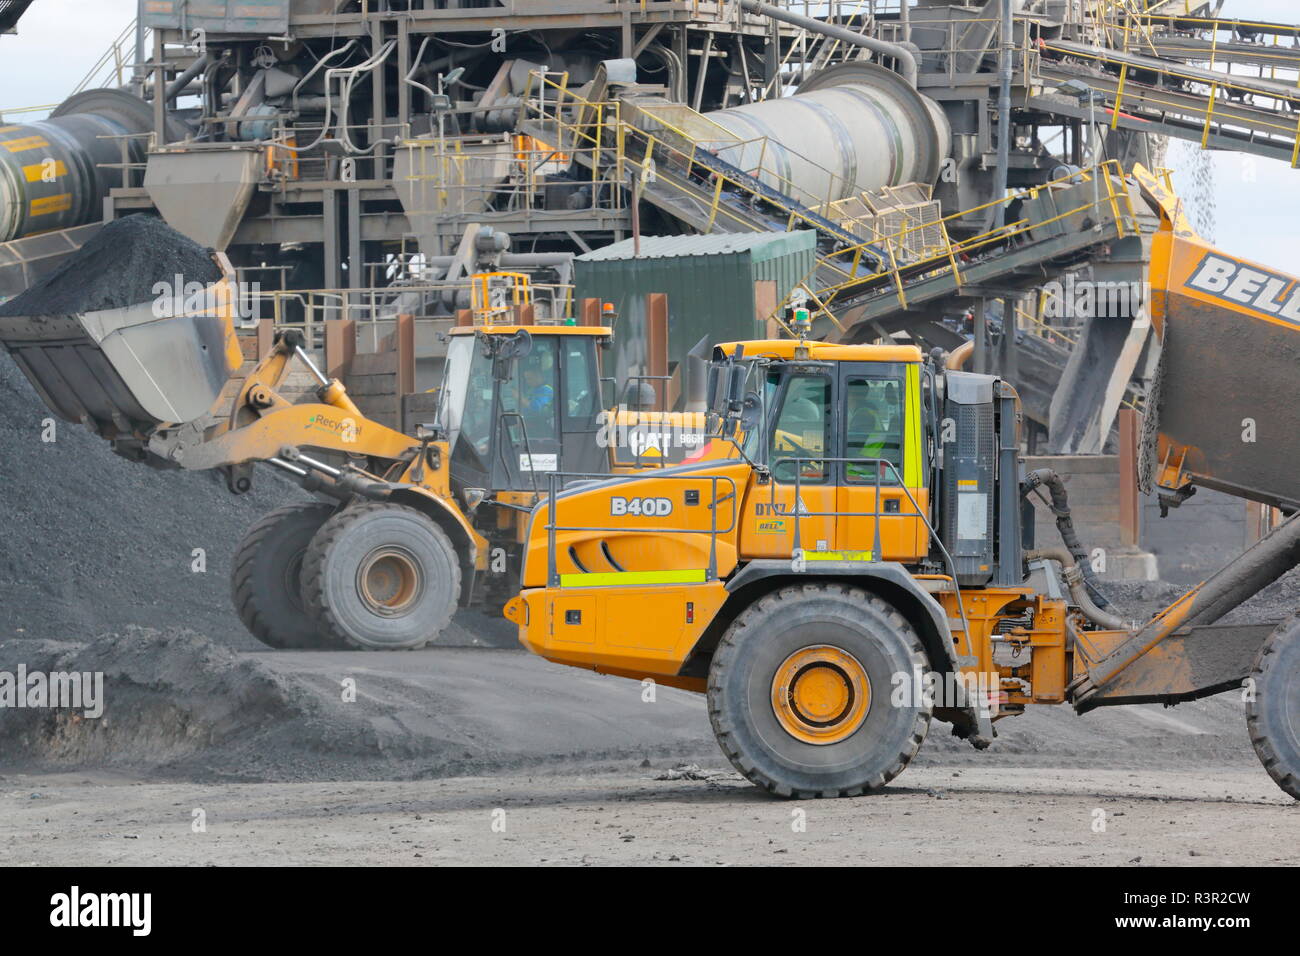 A Caterpillar 966 & Bell 40D ADT at work on the REcycoal Coal Recycling Plant in Rossington,Doncaster which has now been demolished. Stock Photo